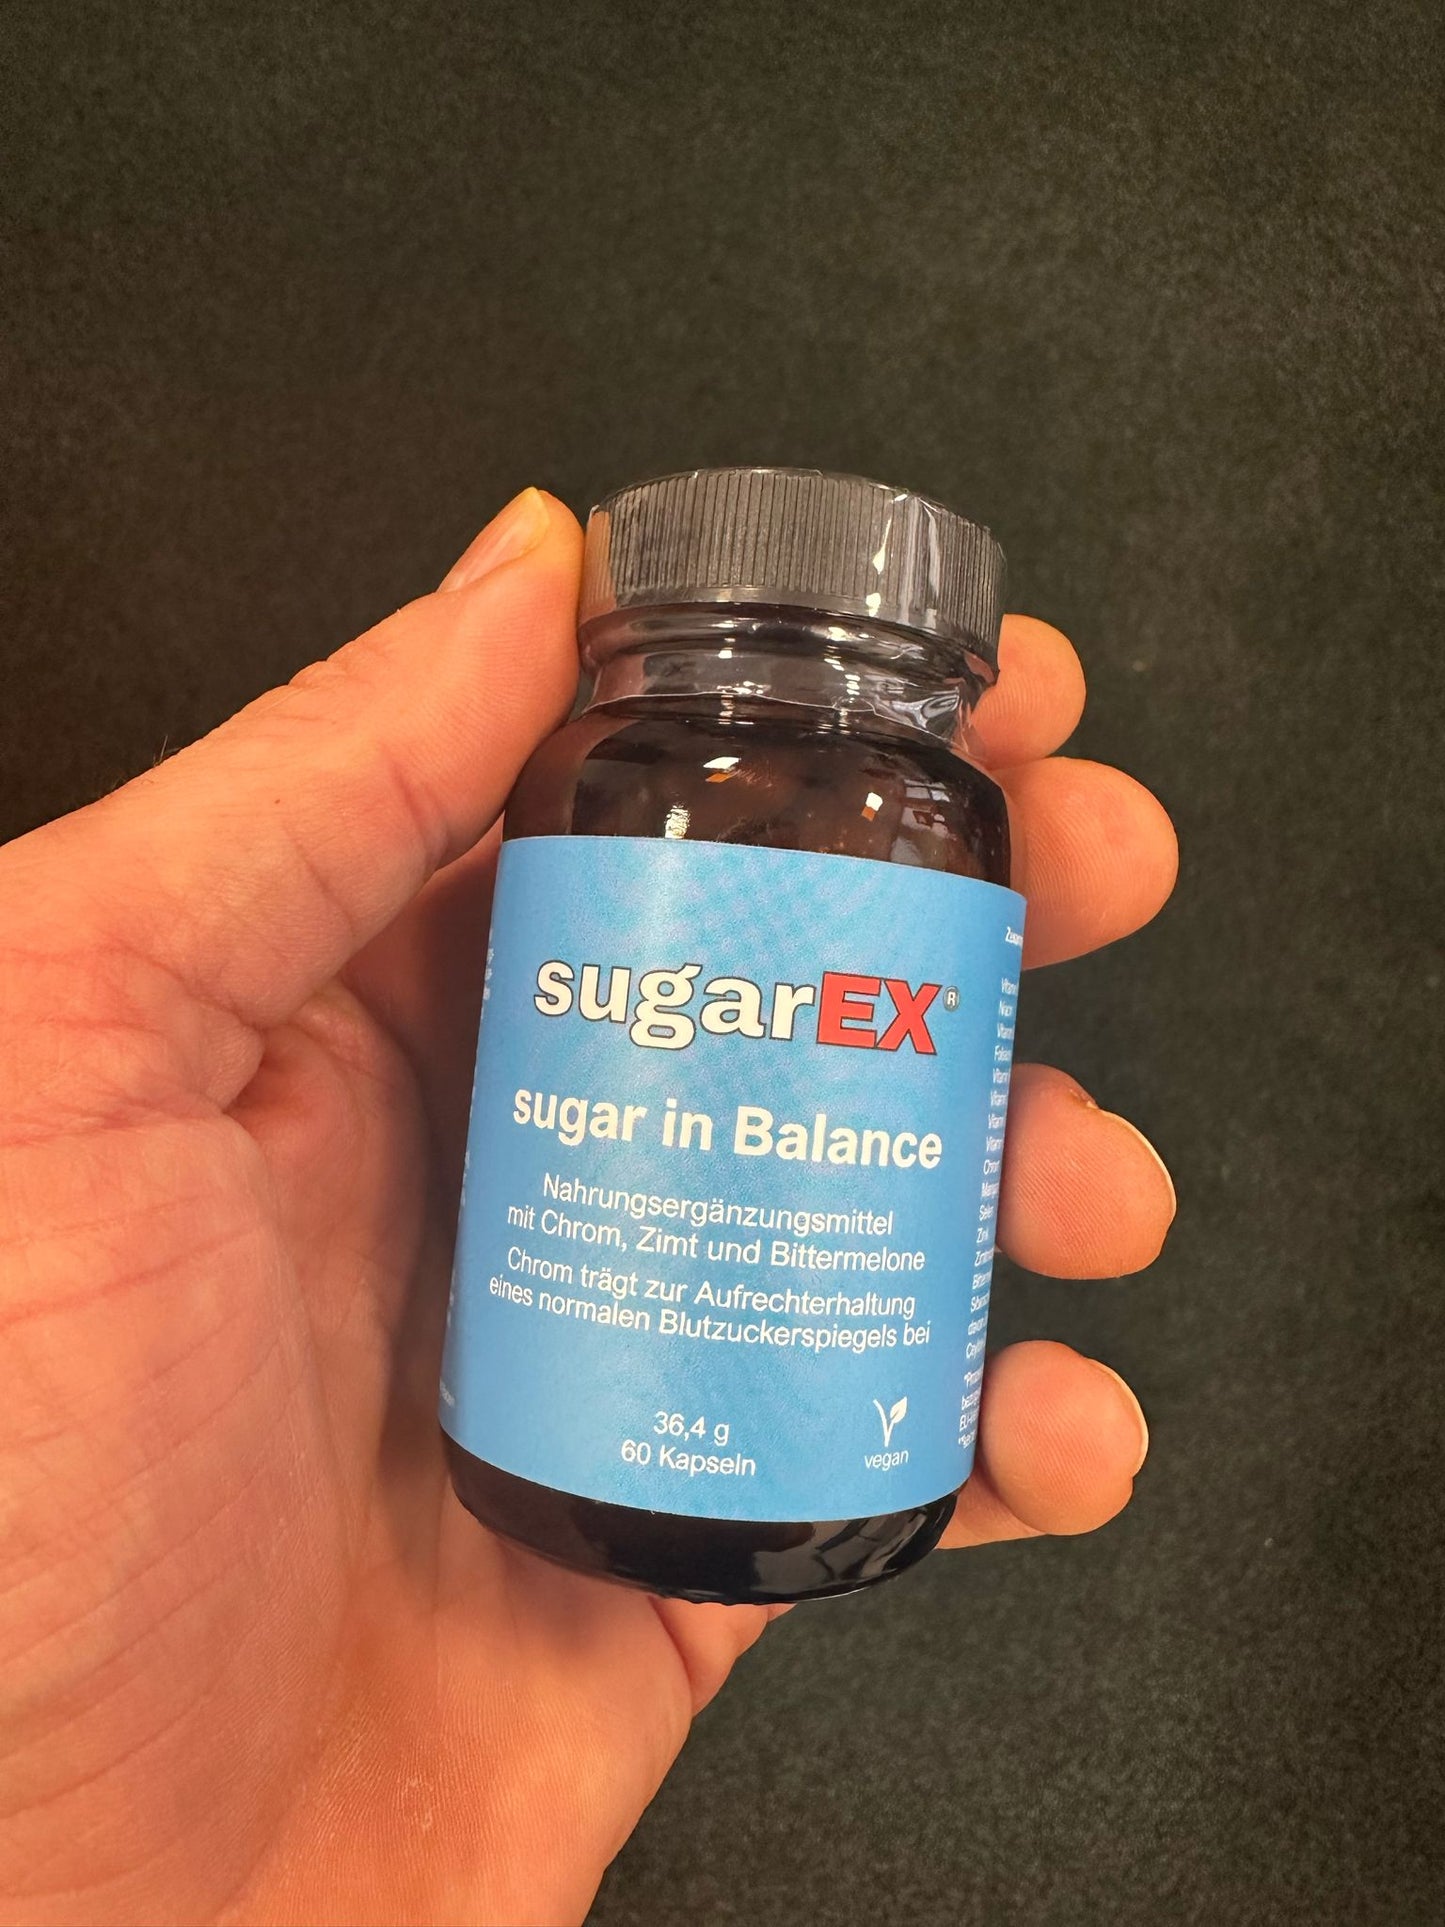 sugarEX - sugar in Balance - dietary supplement - designed to help you regulate your appetite and normalize blood sugar levels